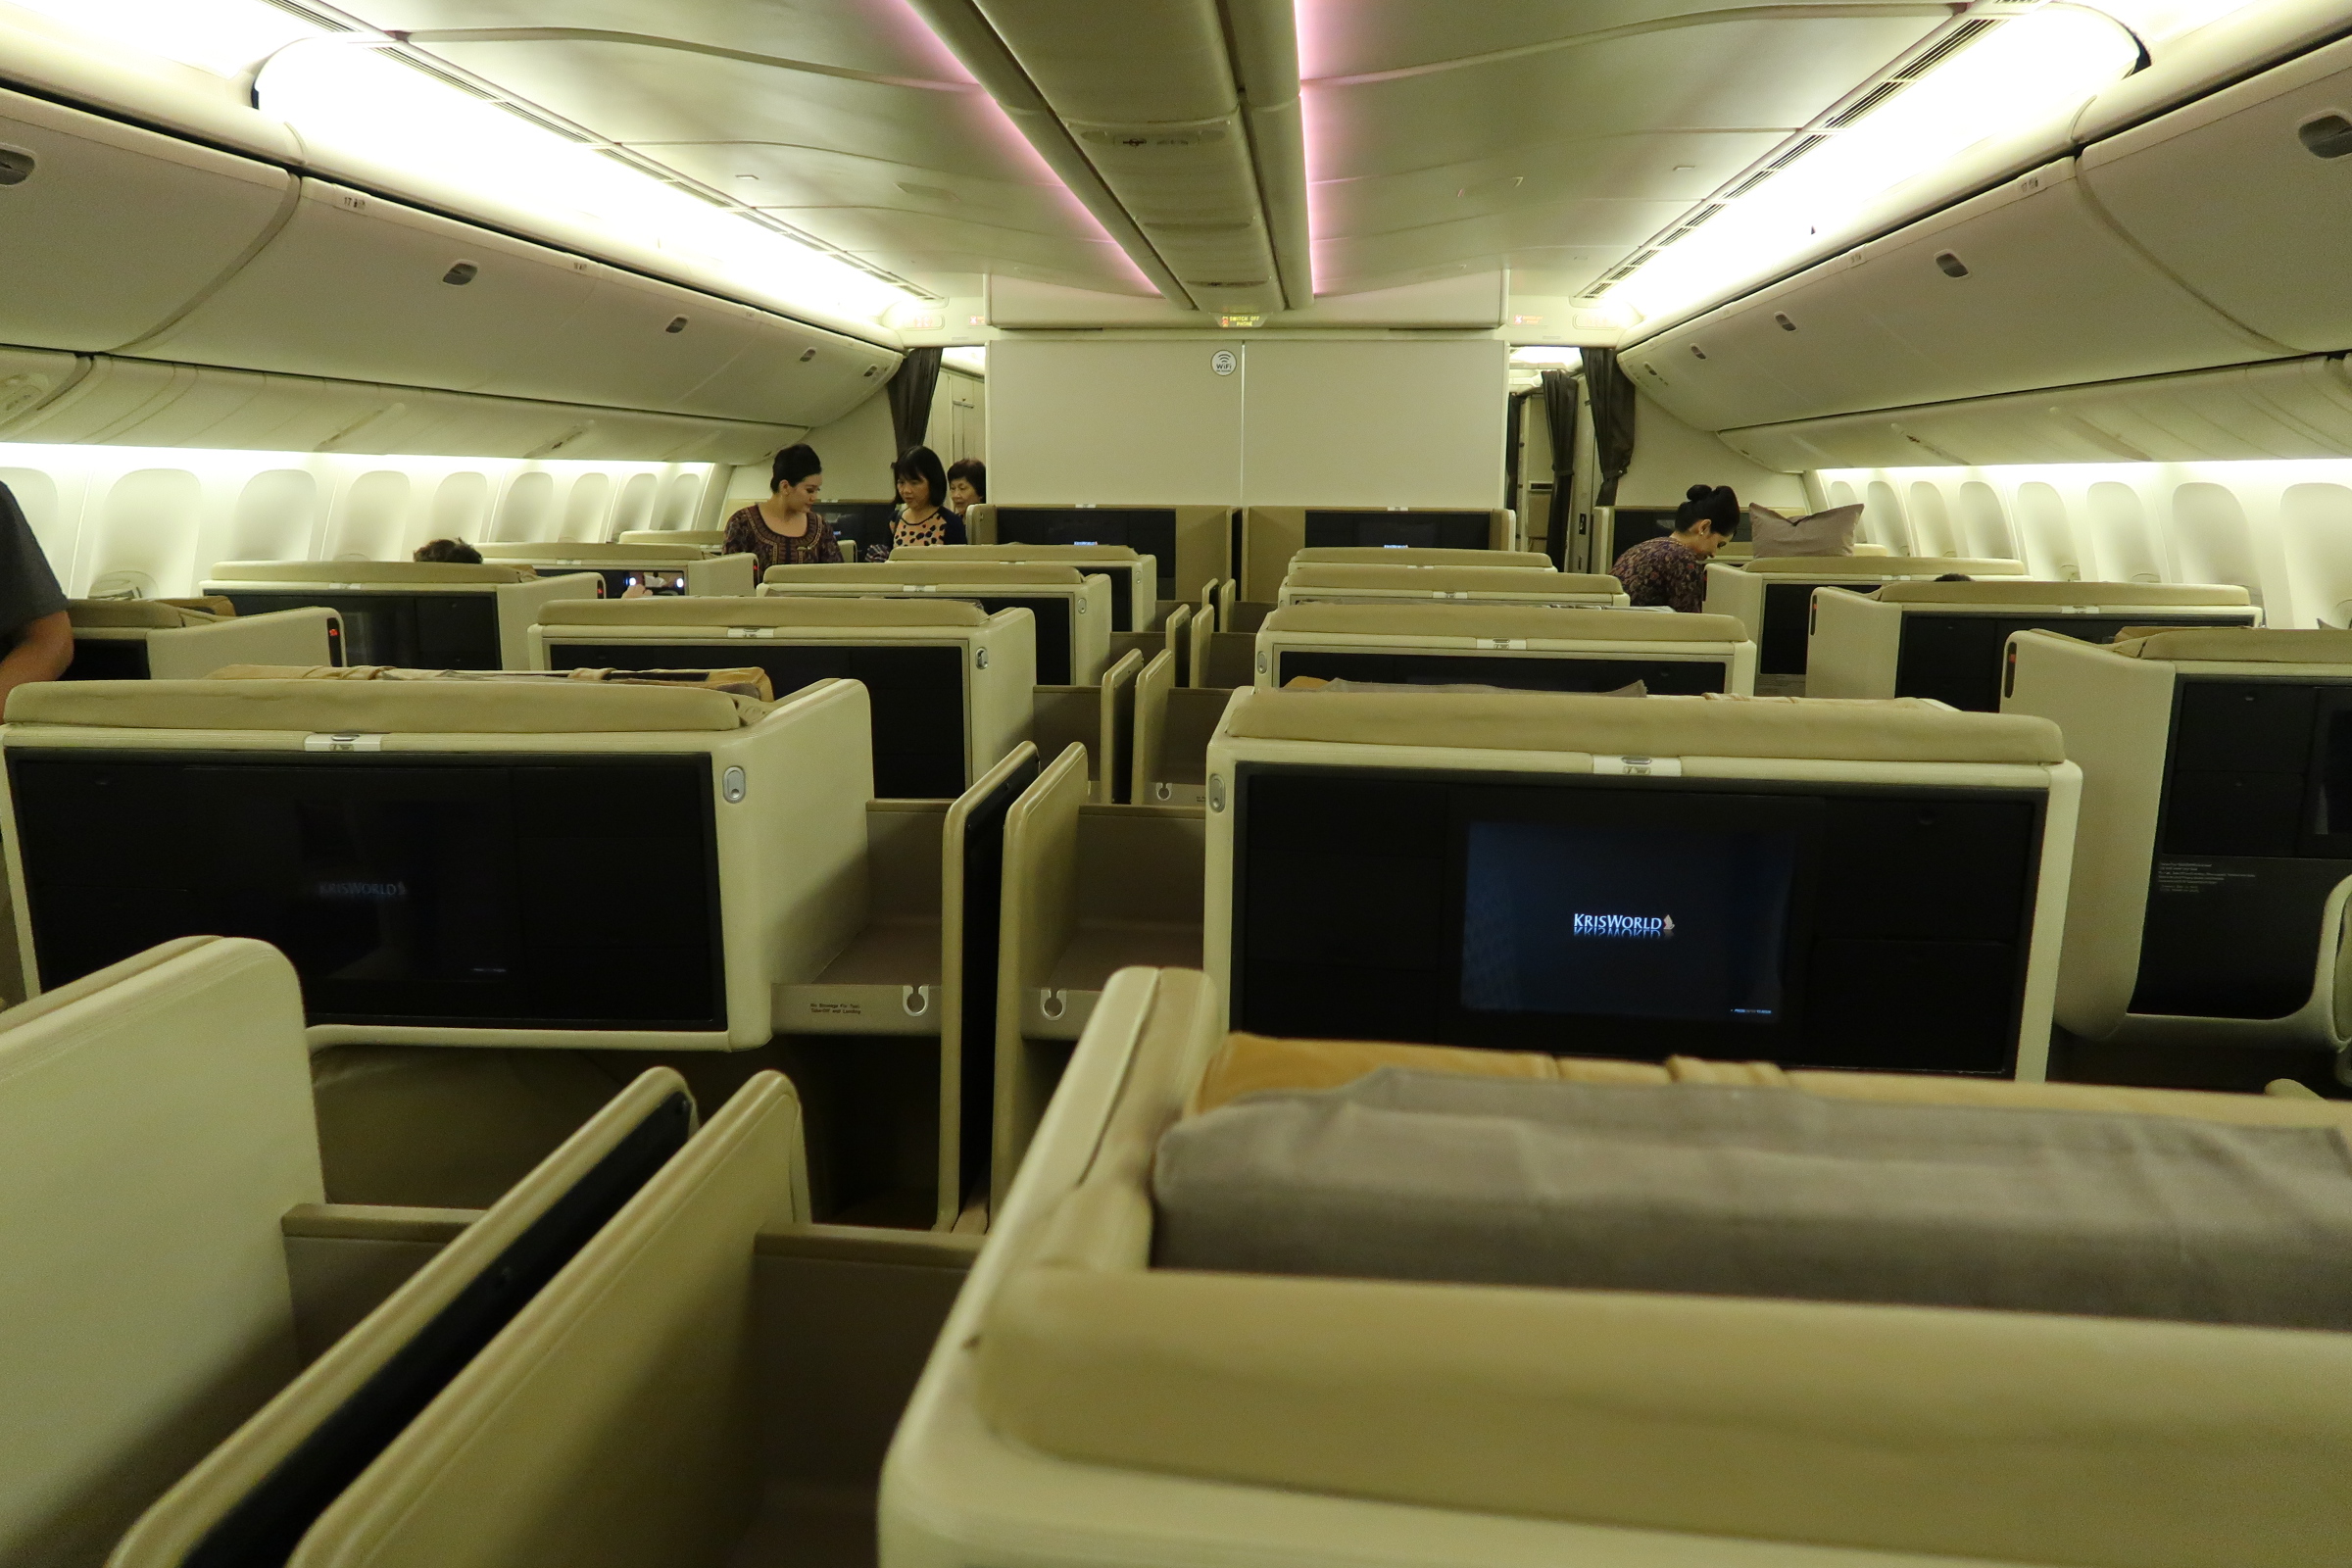 Spacious 1-2-1 layout of SQ 777-300ER Business Class